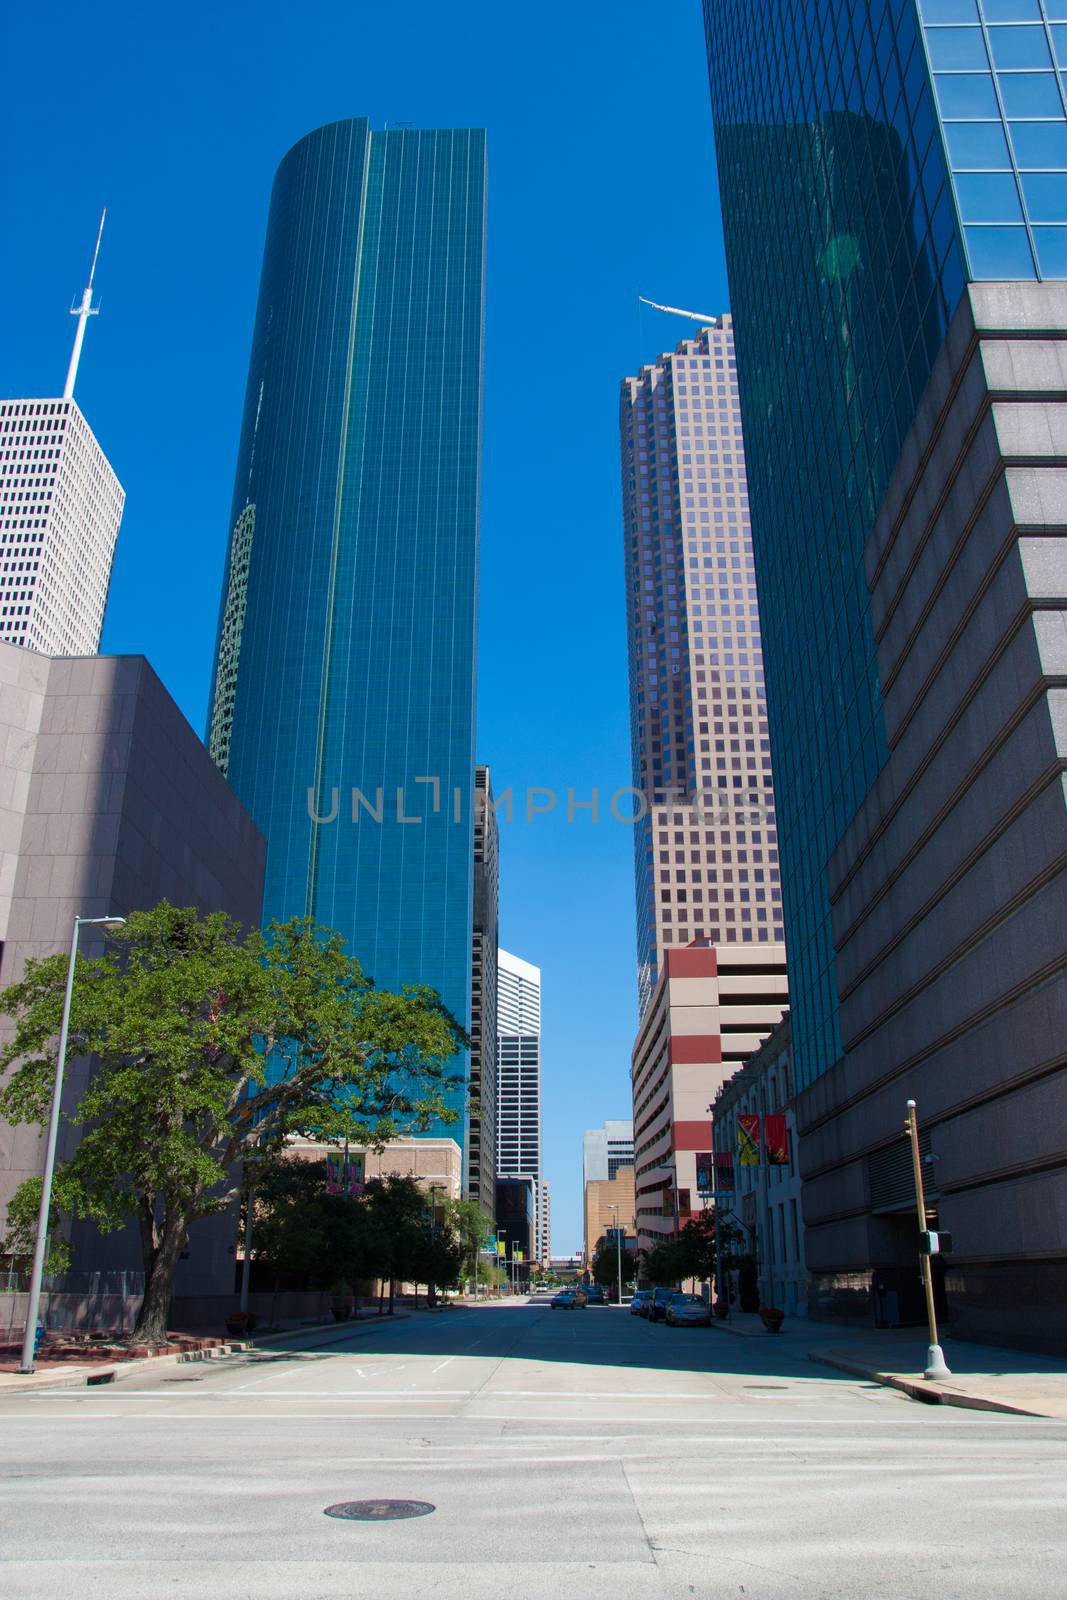 A street view of downtown Houston, Texas on a weekend.